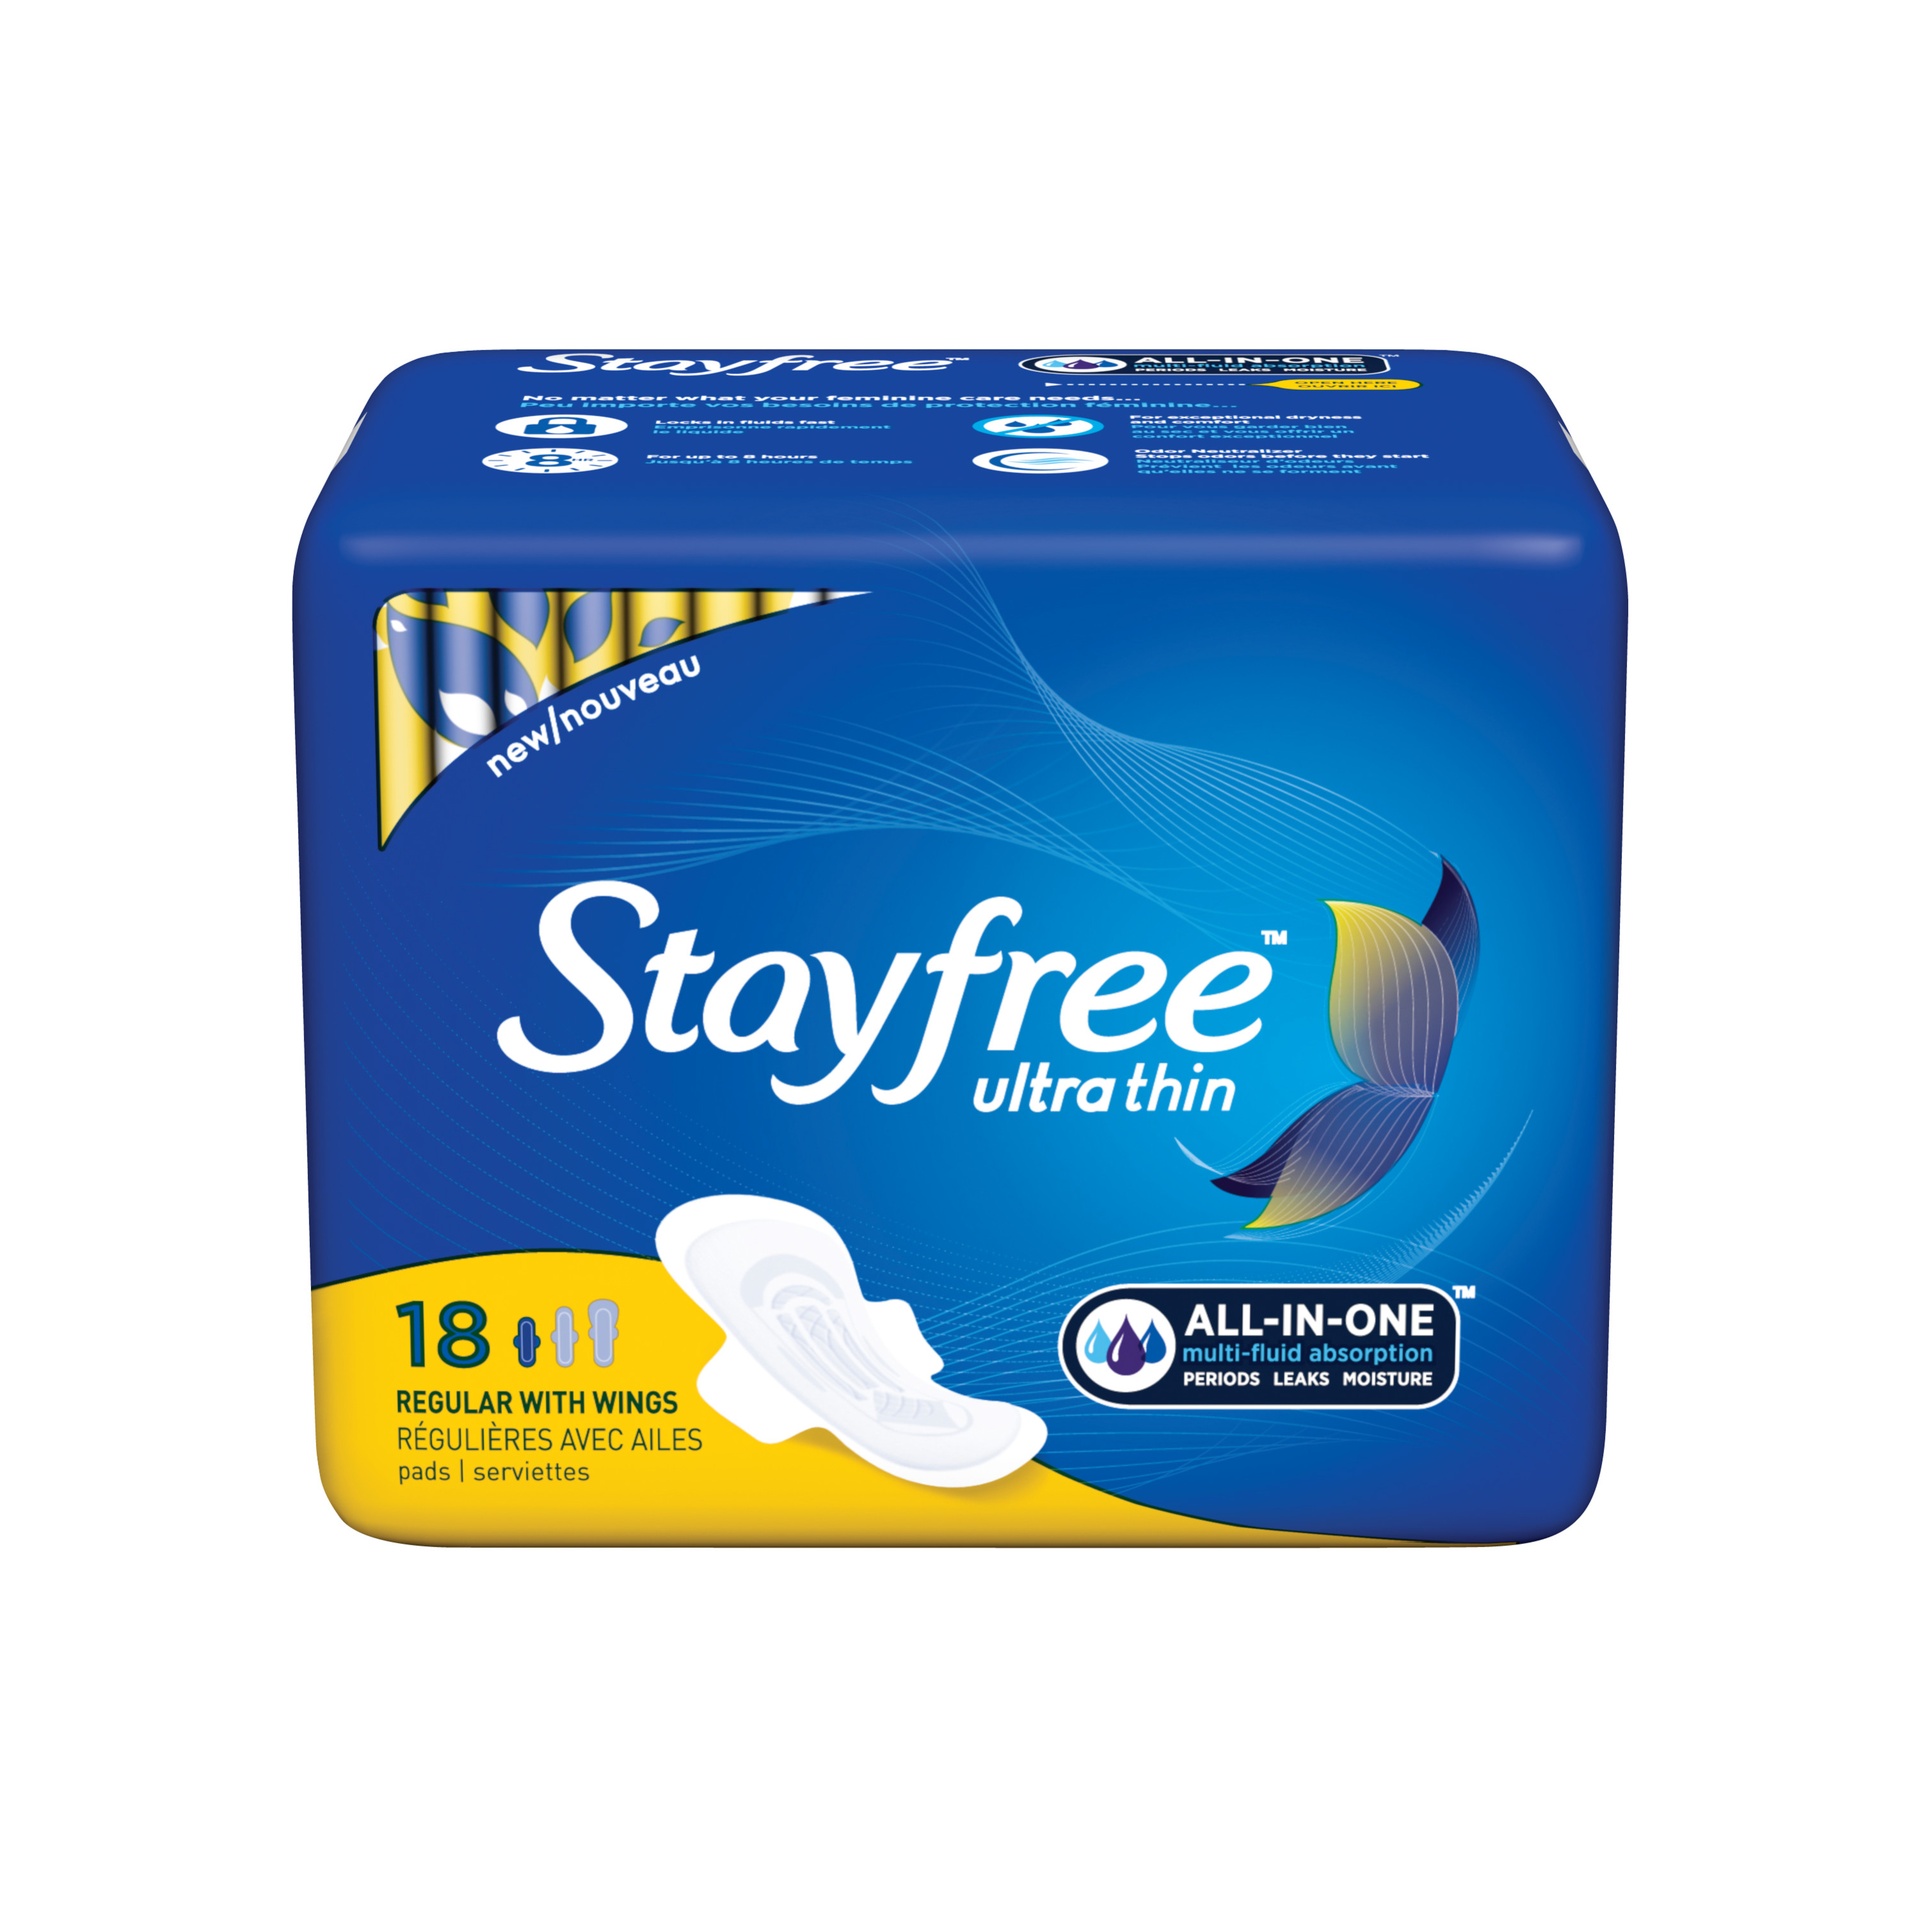 STAYFREE ULTRA THIN REGULAR WITH WINGS 18'S 